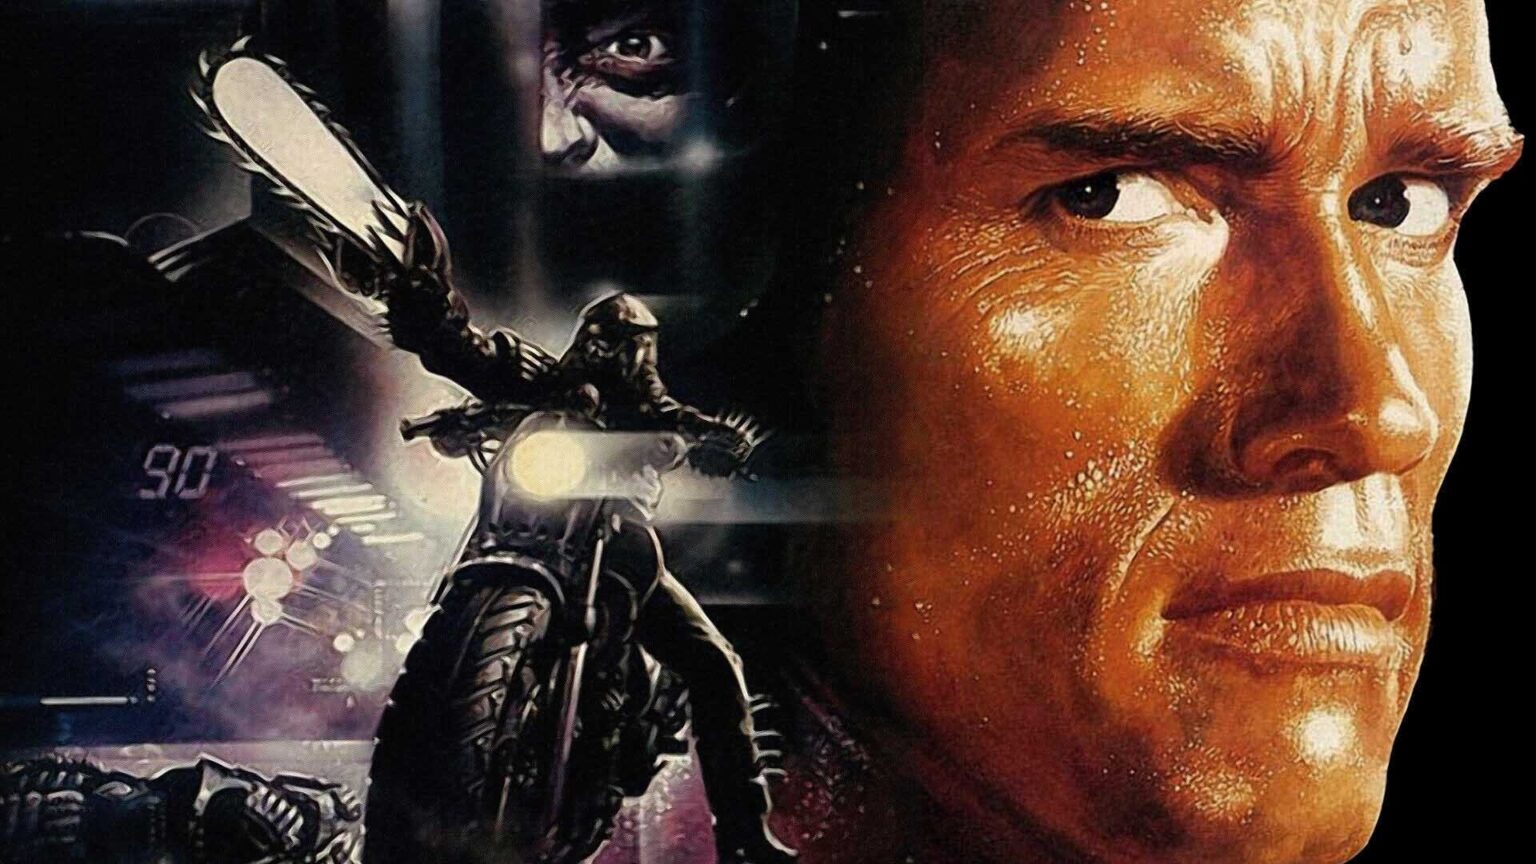 Another Stephen King classic is being reimagined for the big screen. Here's all the buzz about the upcoming 'The Running Man' reboot.